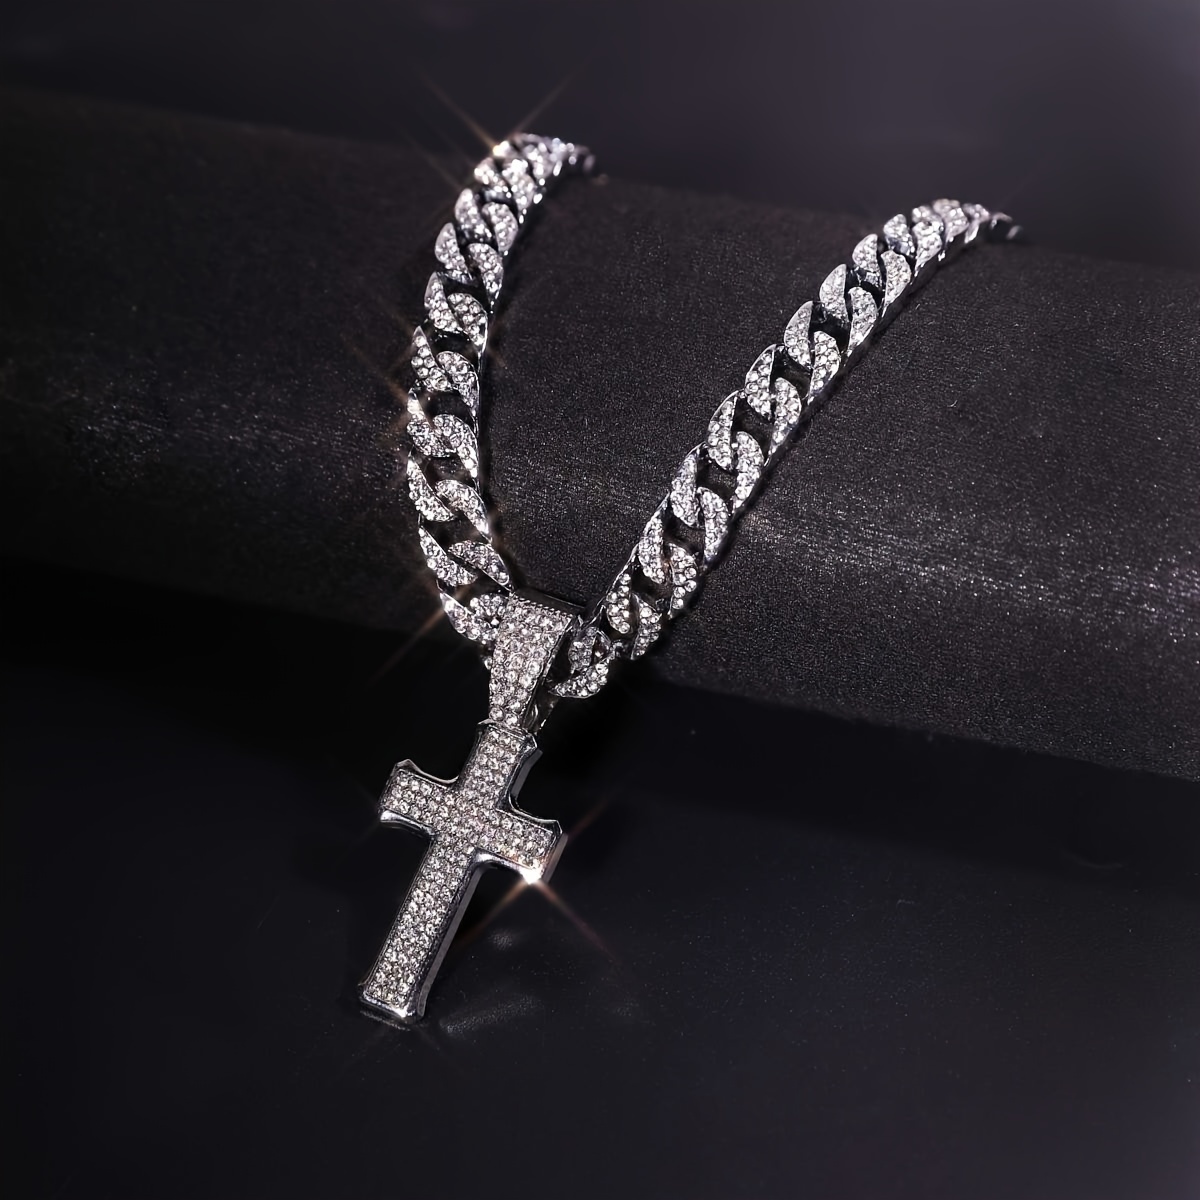 1pc Antique Silver Bronze Color Large Flower Cross Charms Pendant, For DIY  Earrings Necklace Handmade Jewelry Making